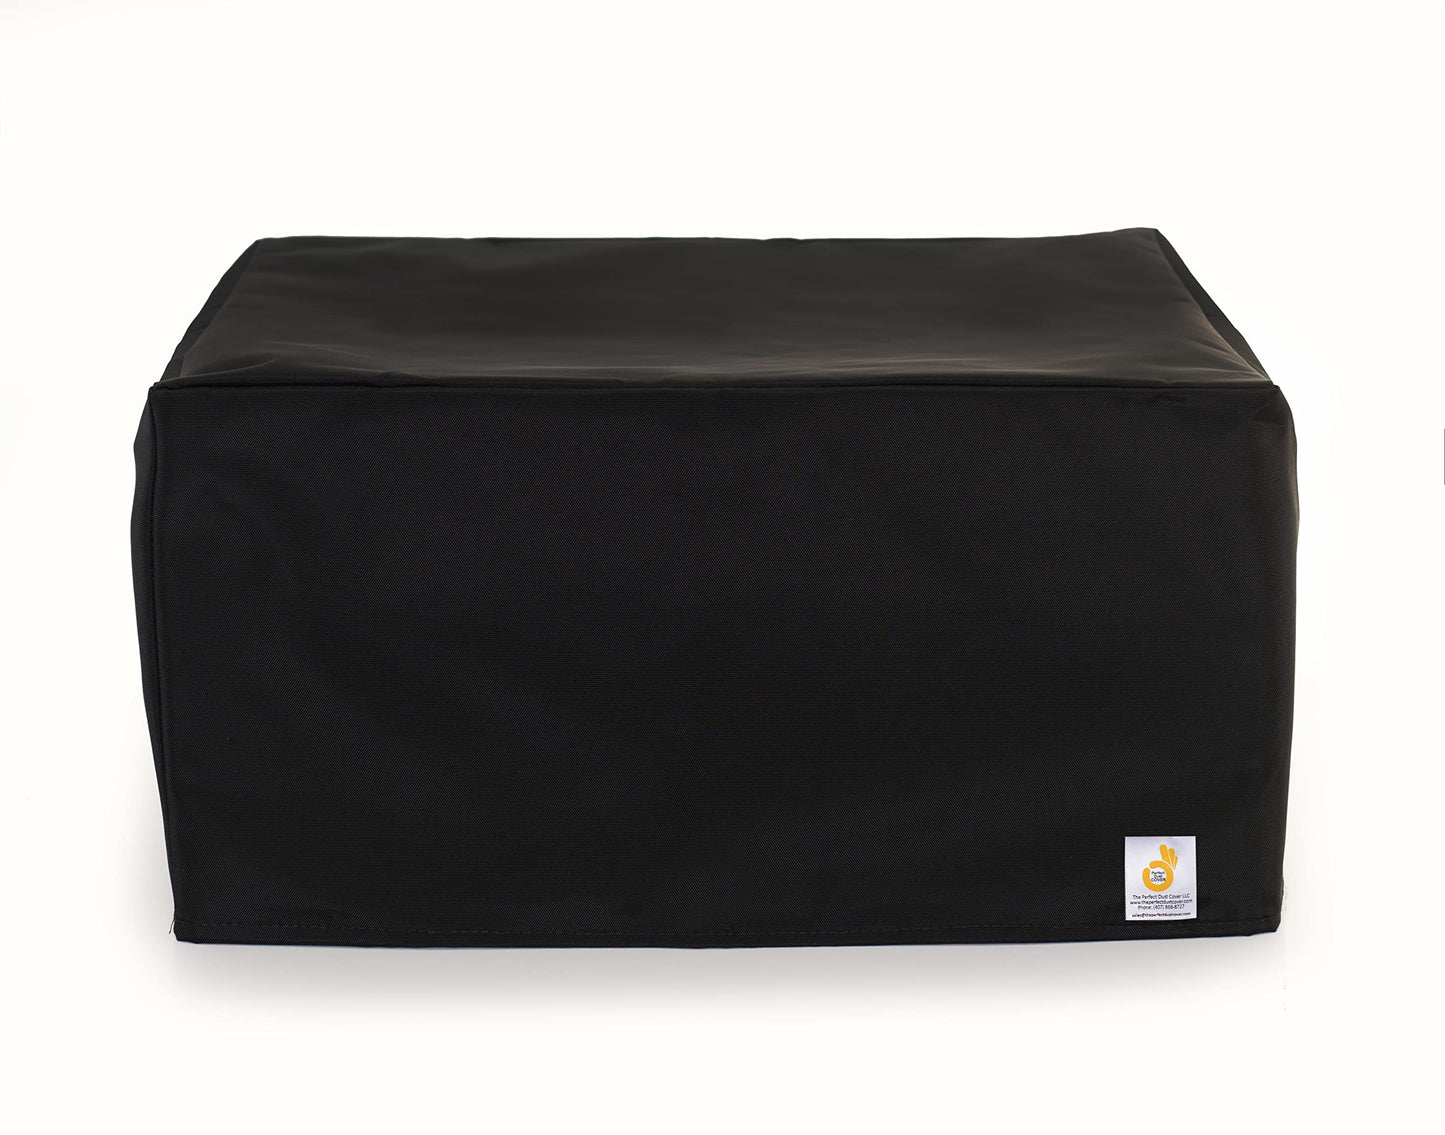 The Perfect Dust Cover, Black Nylon Cover Compatible with Canon imageCLASS MF262dw II Black and White Laser Printer, Double Stitched and Waterproof Dust Cover by The Perfect Dust Cover LLC